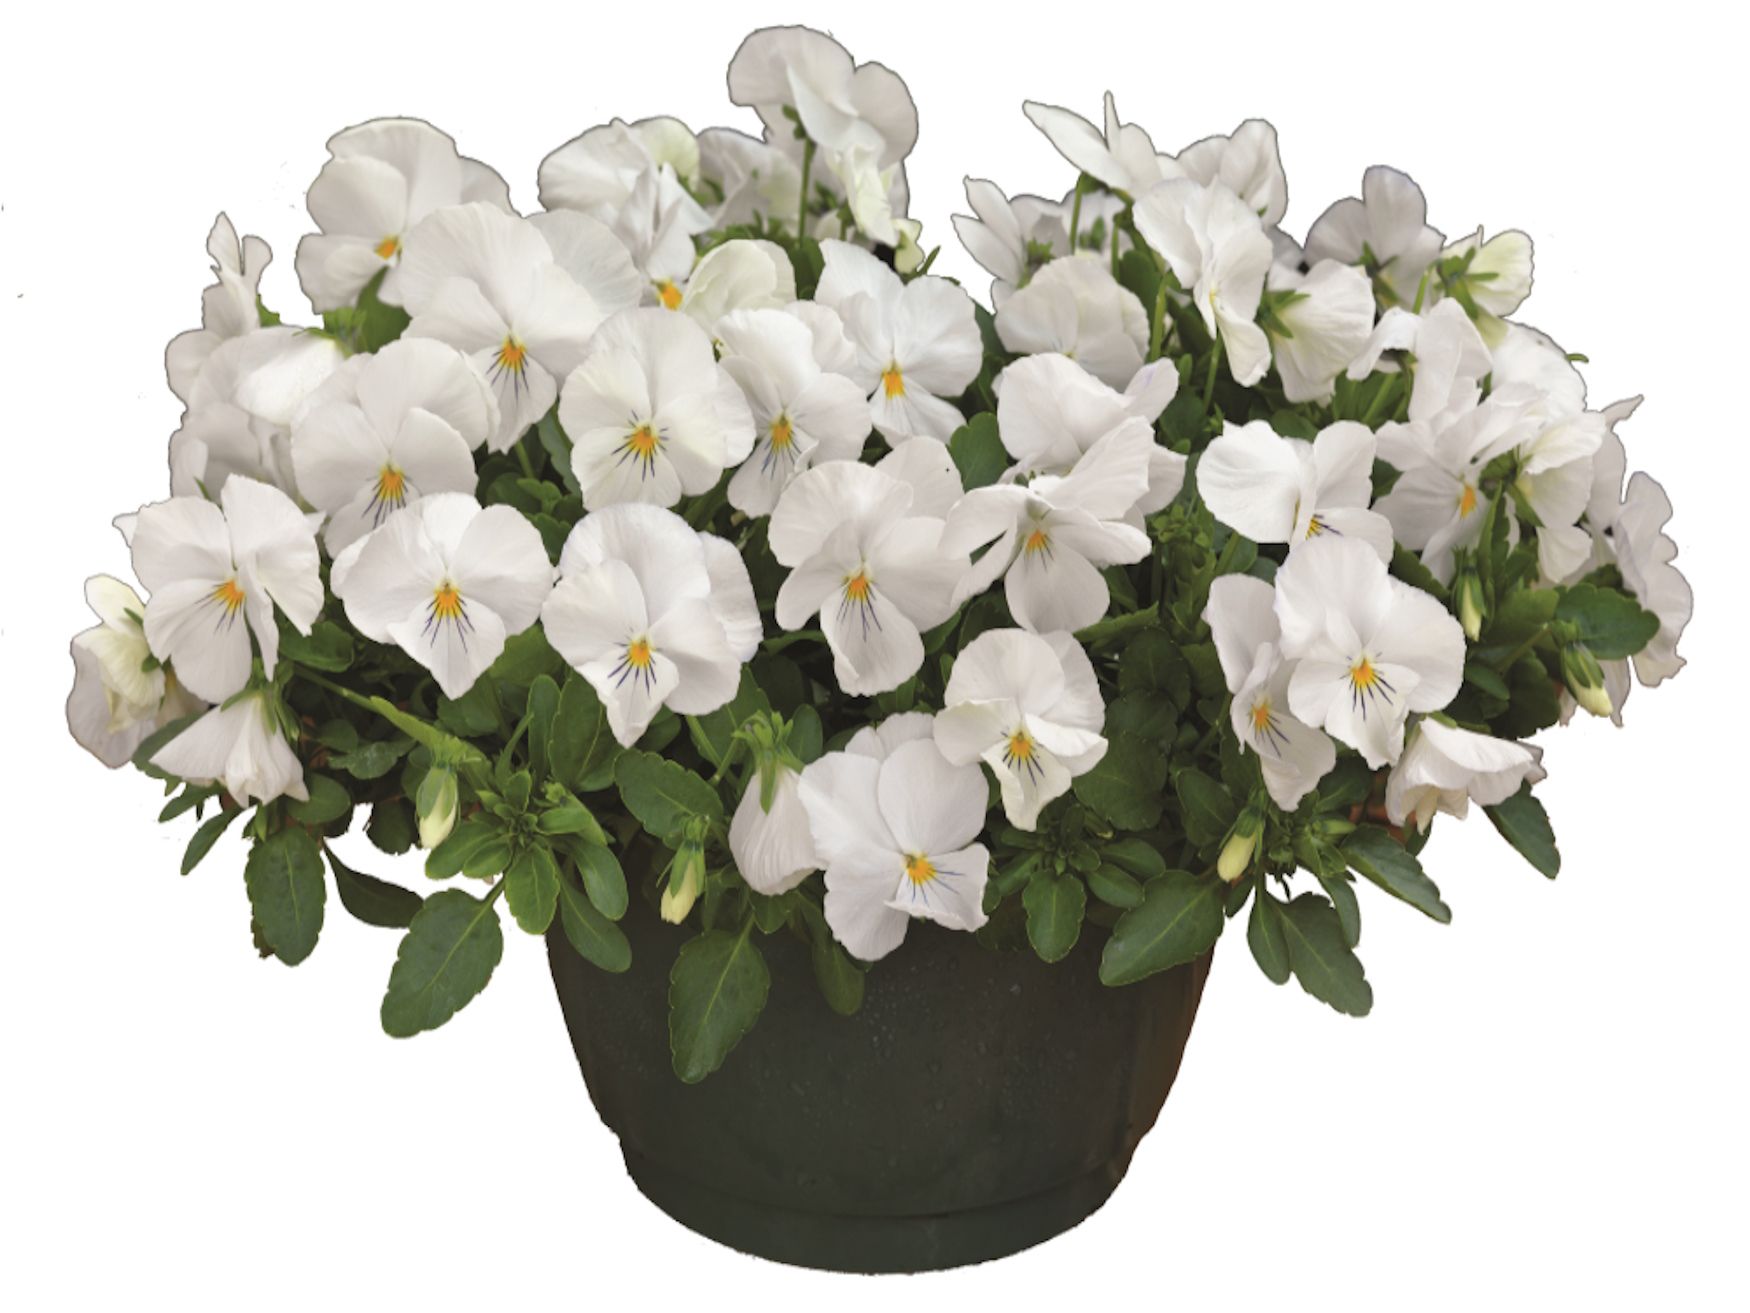 Pansy Freefall XL White Flower for sale in Lebanon PA